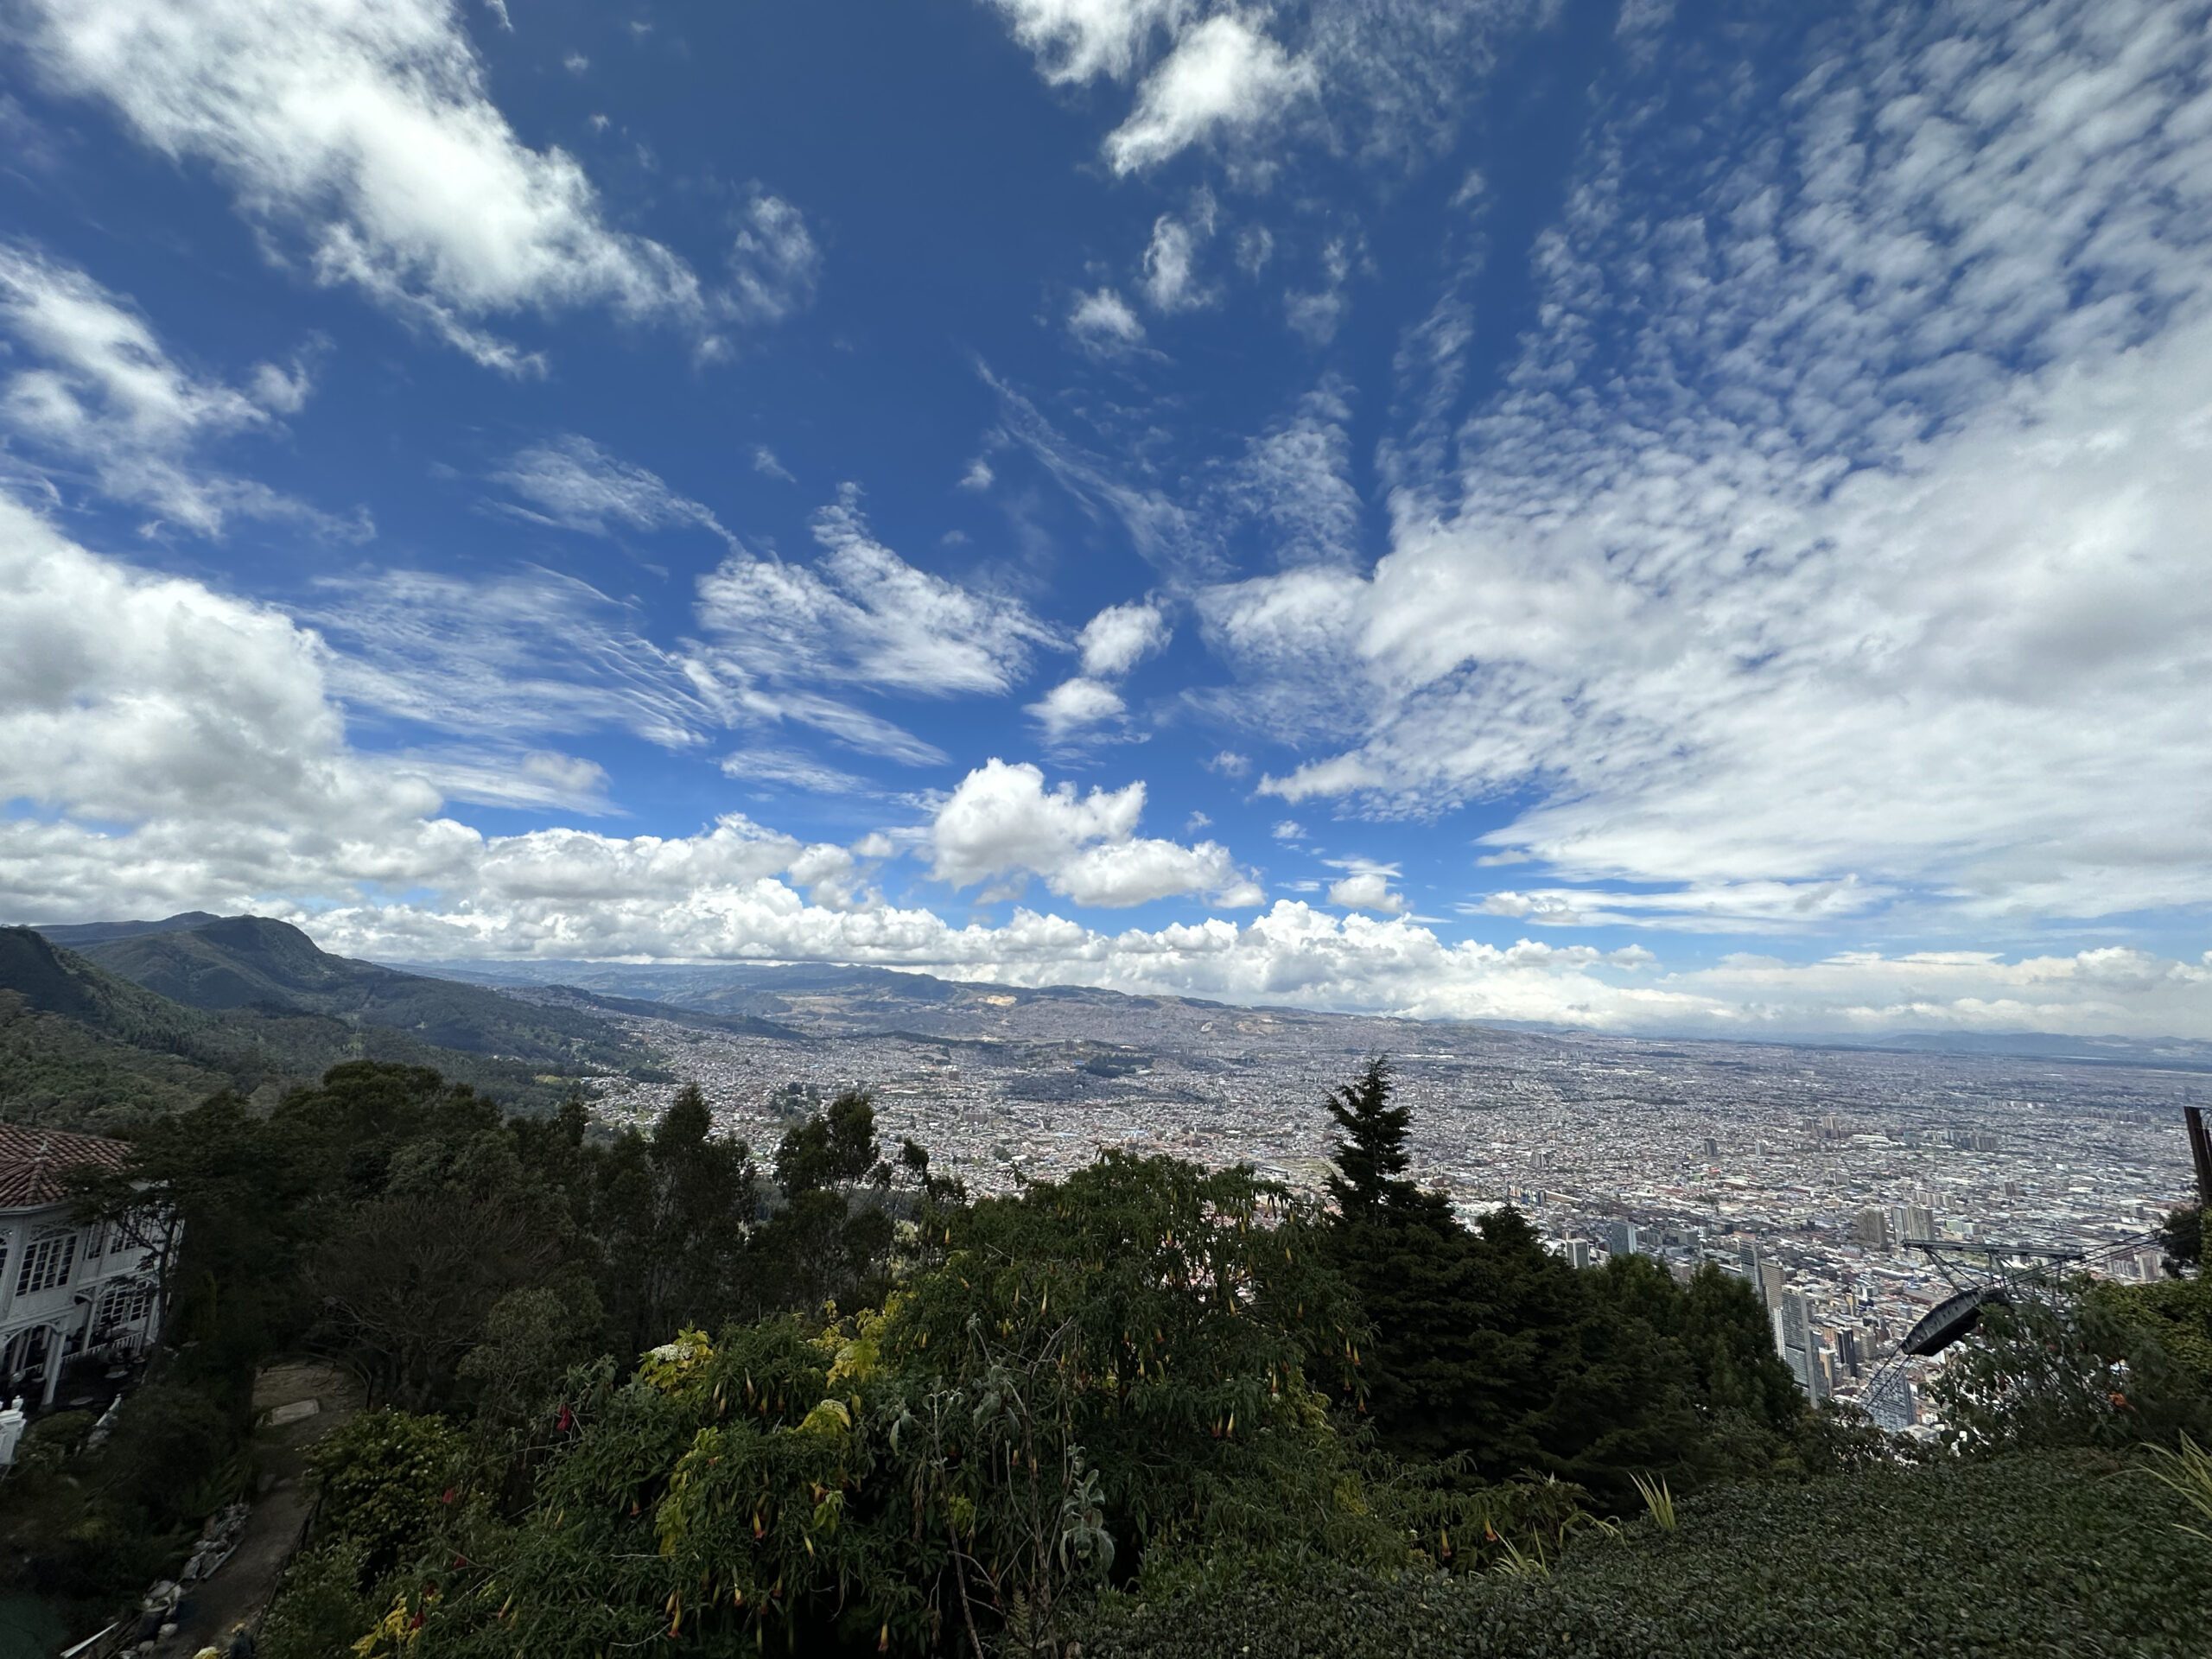 A panoramic view of a cityscape under a bright blue sky with scattered clouds, taken from a vantage point overlooking lush greenery, is one of the many highlights of Bogotá city tours.